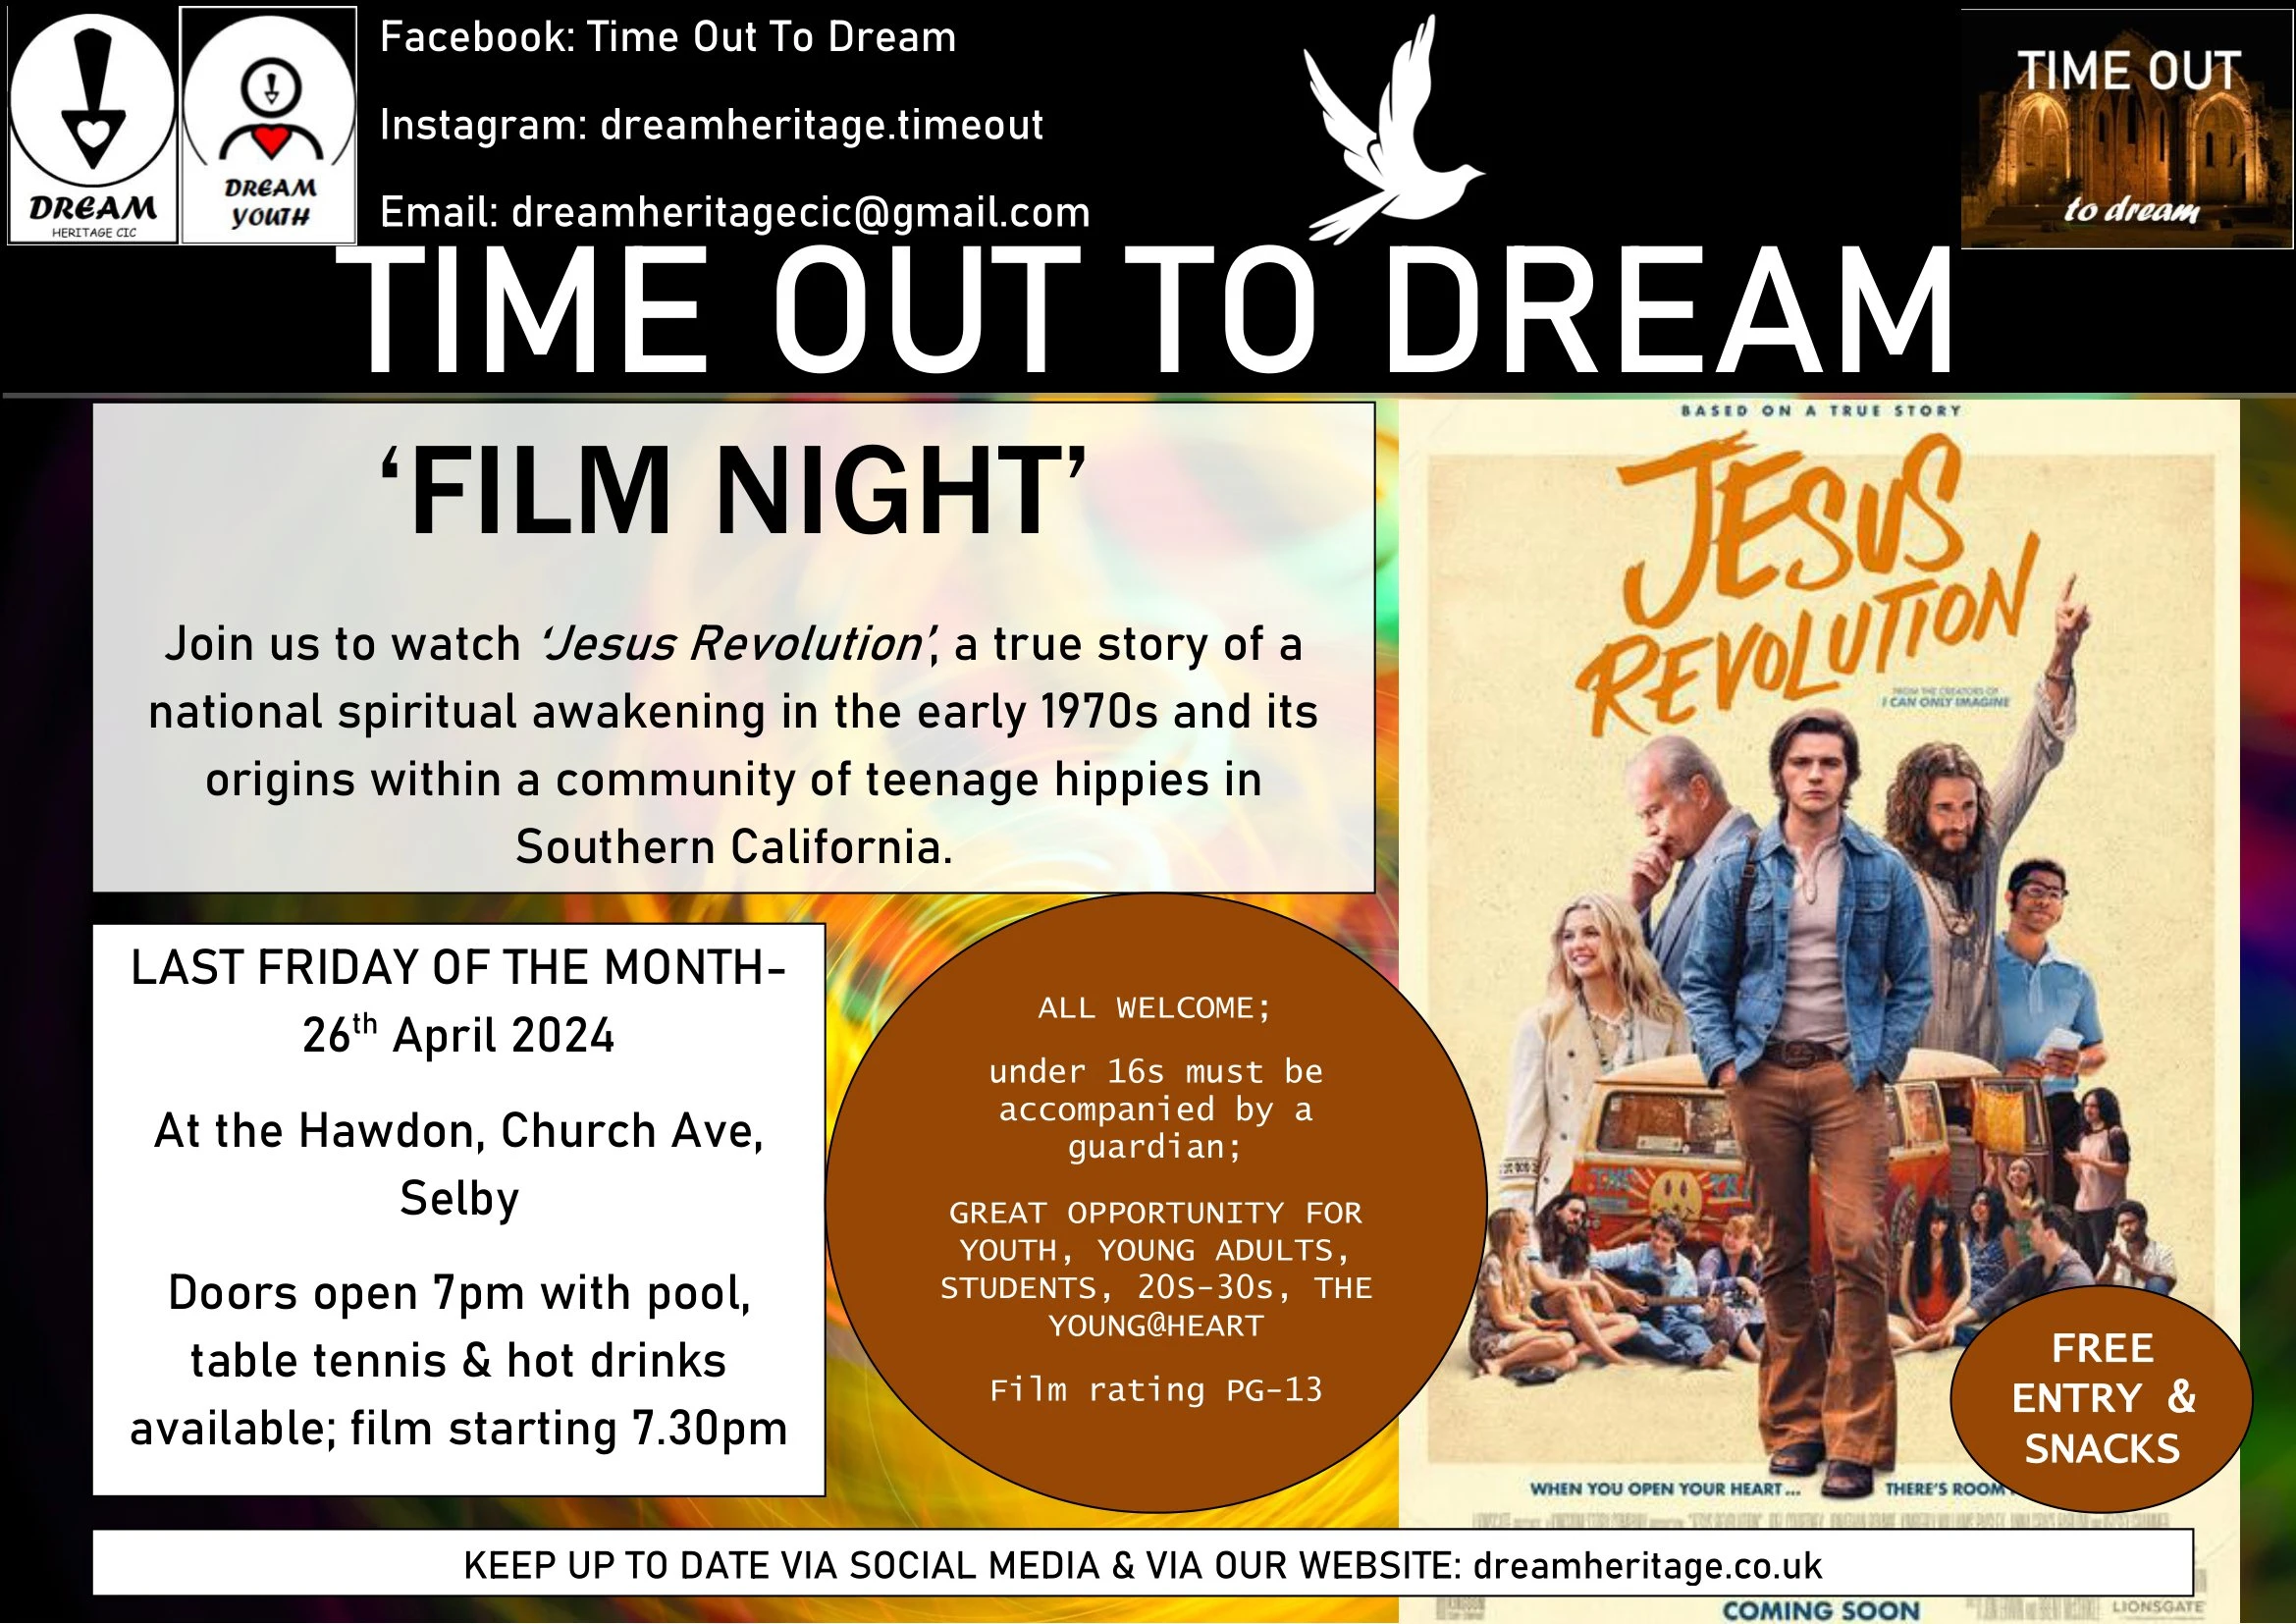 790-time-out-to-dream-26th-april-24-film-night-1-17132592172783.jpg